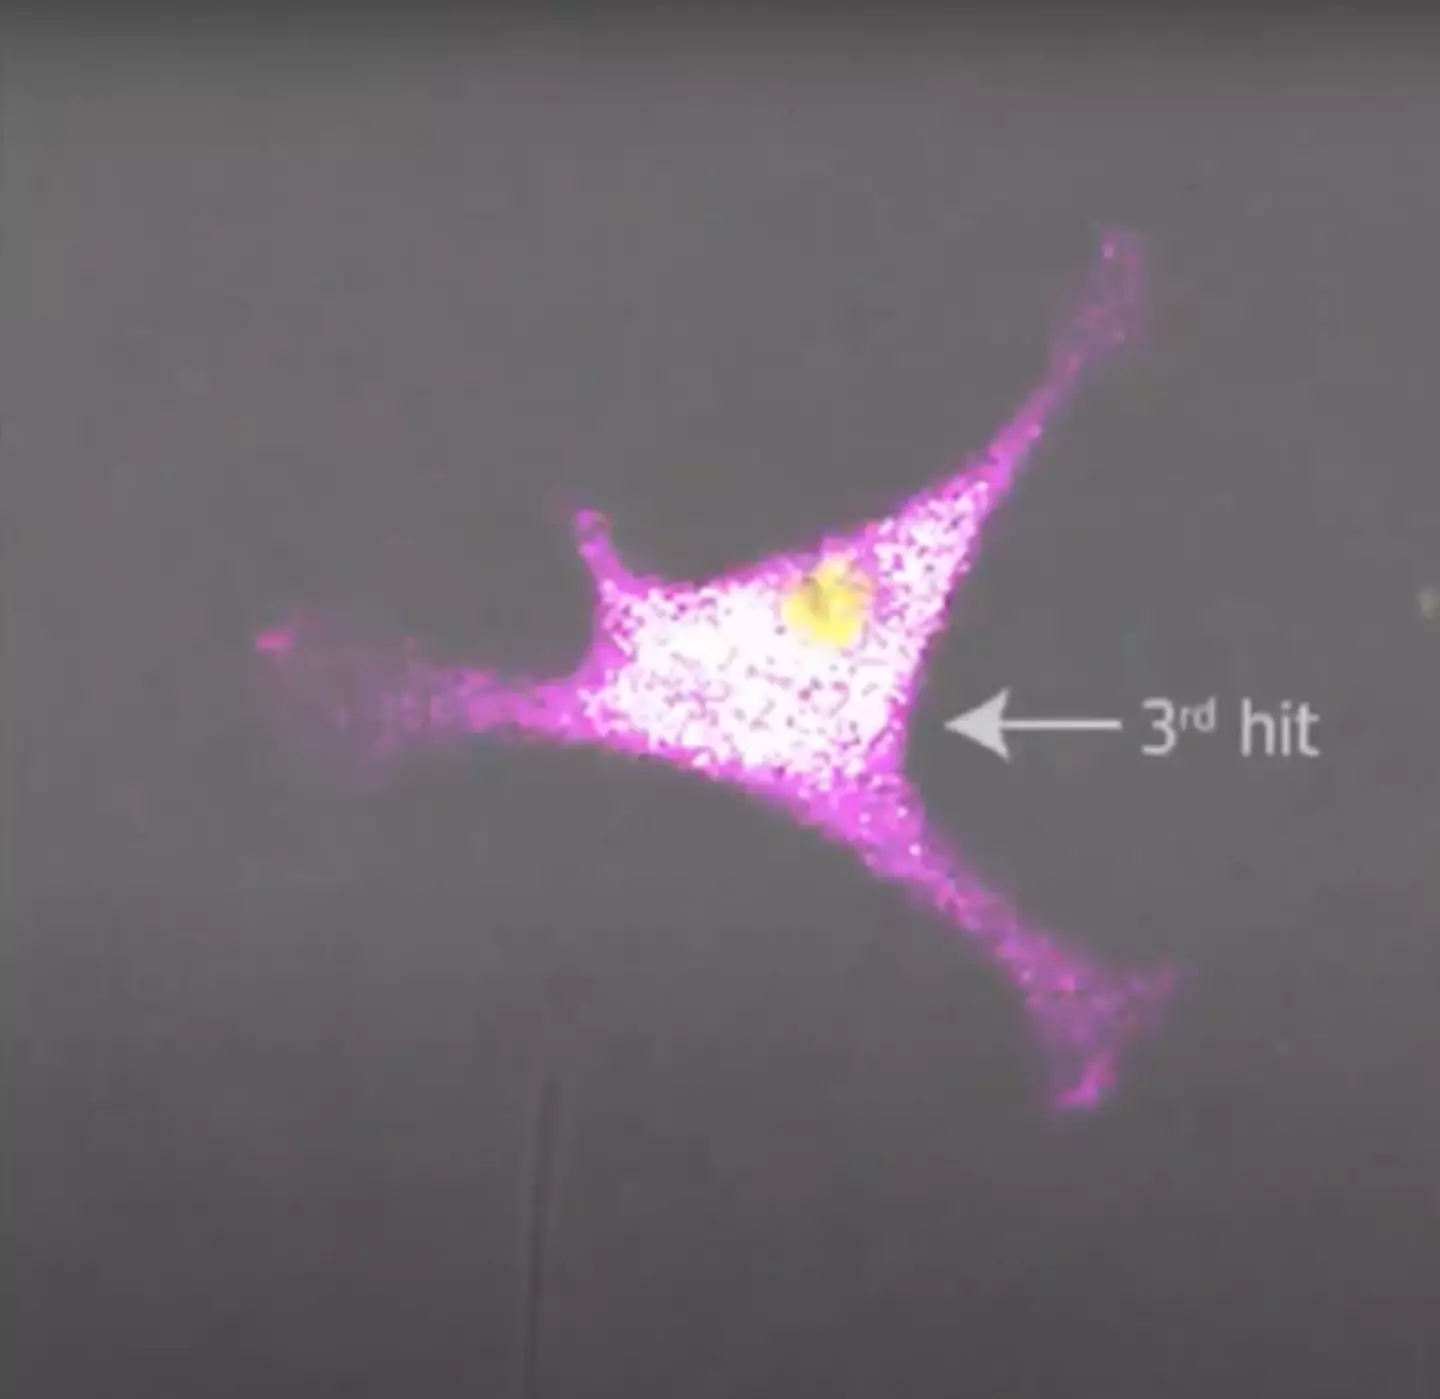 The video showed the T-cell attacking a cancer cell. (YouTube/Science Learning Made Easy)